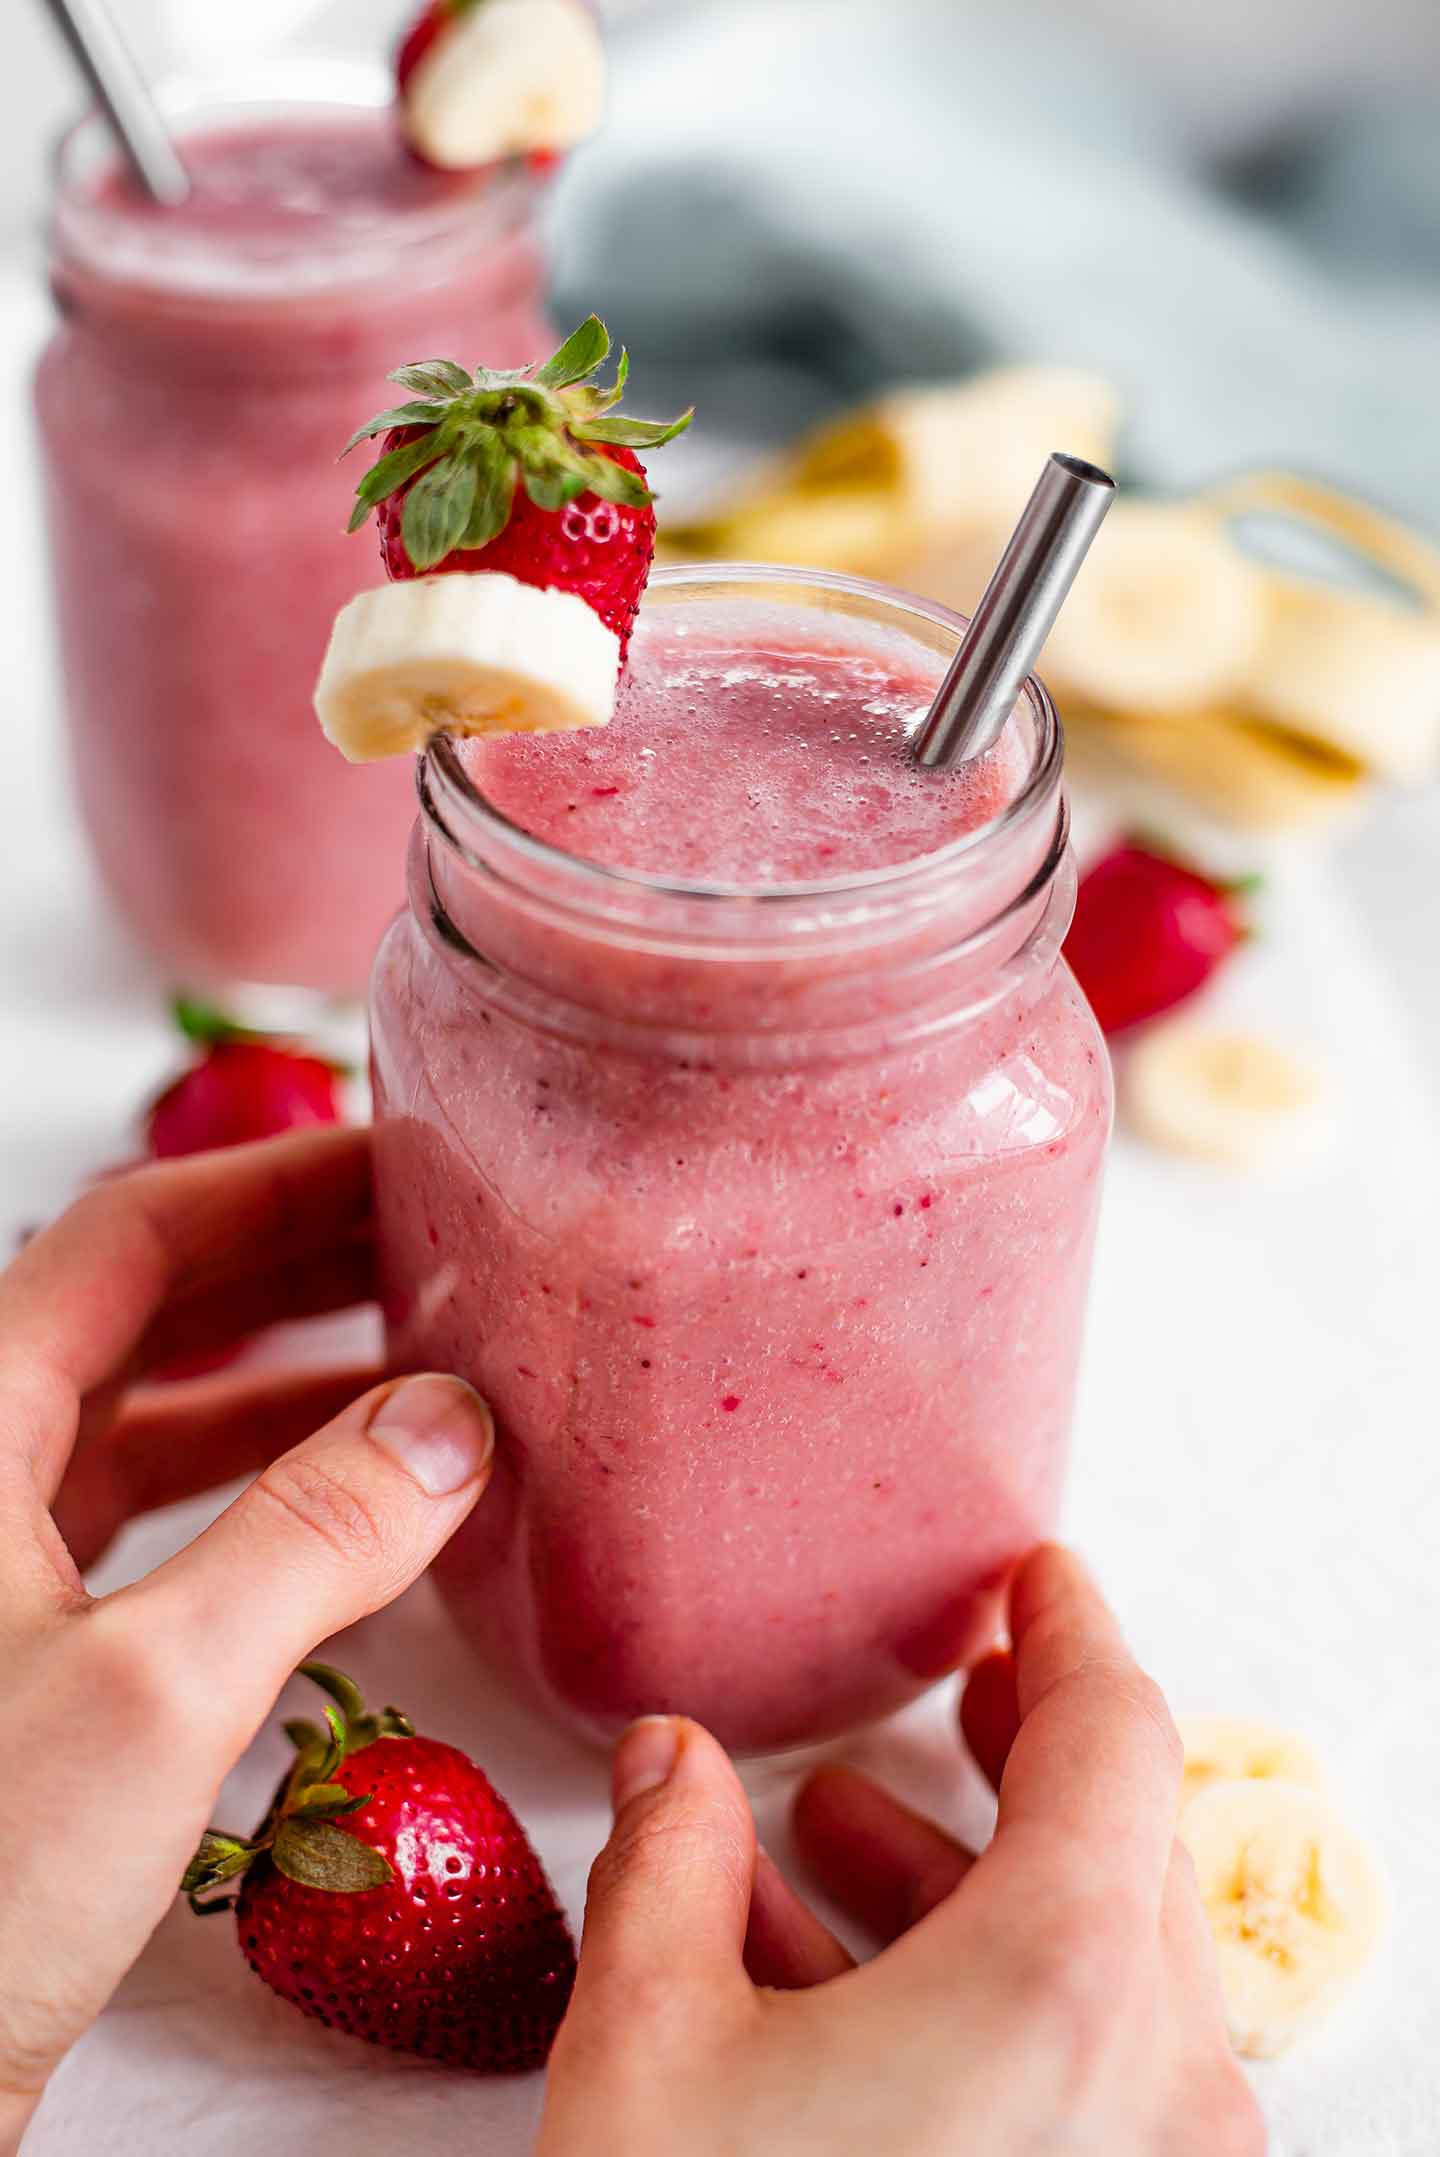 Side view of two hands reaching for a pink strawberry banana smoothie. A fresh strawberry and banana slice garnish the side of the glass jar and a stainless steel straw protrudes.